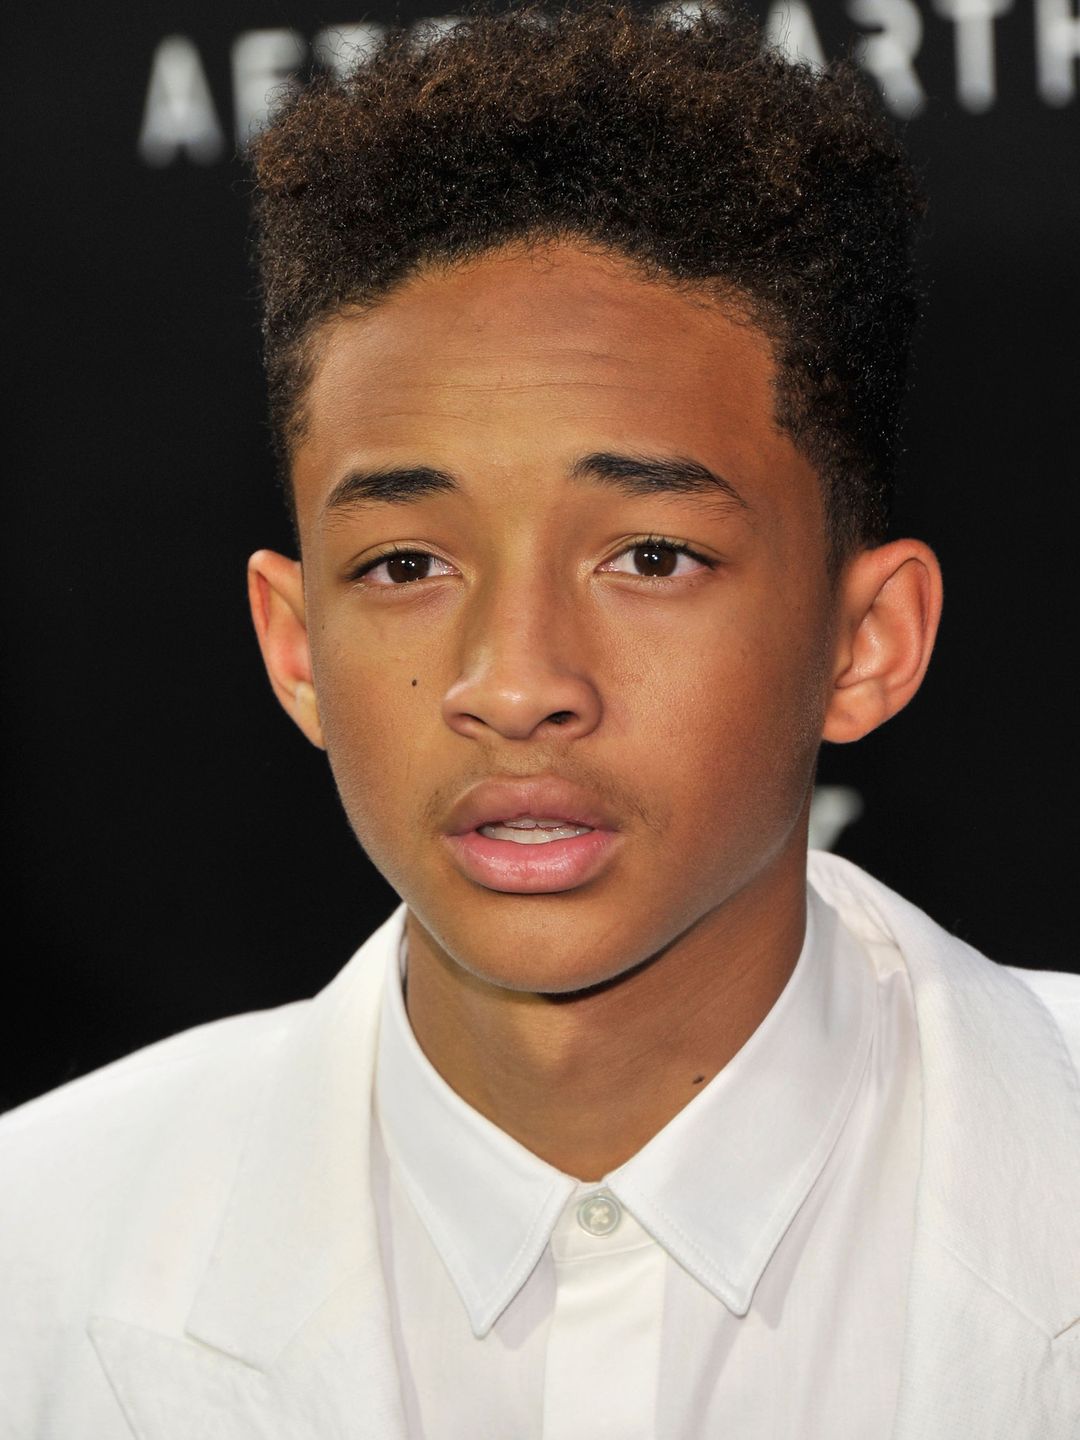 Jaden Smith how did he became famous